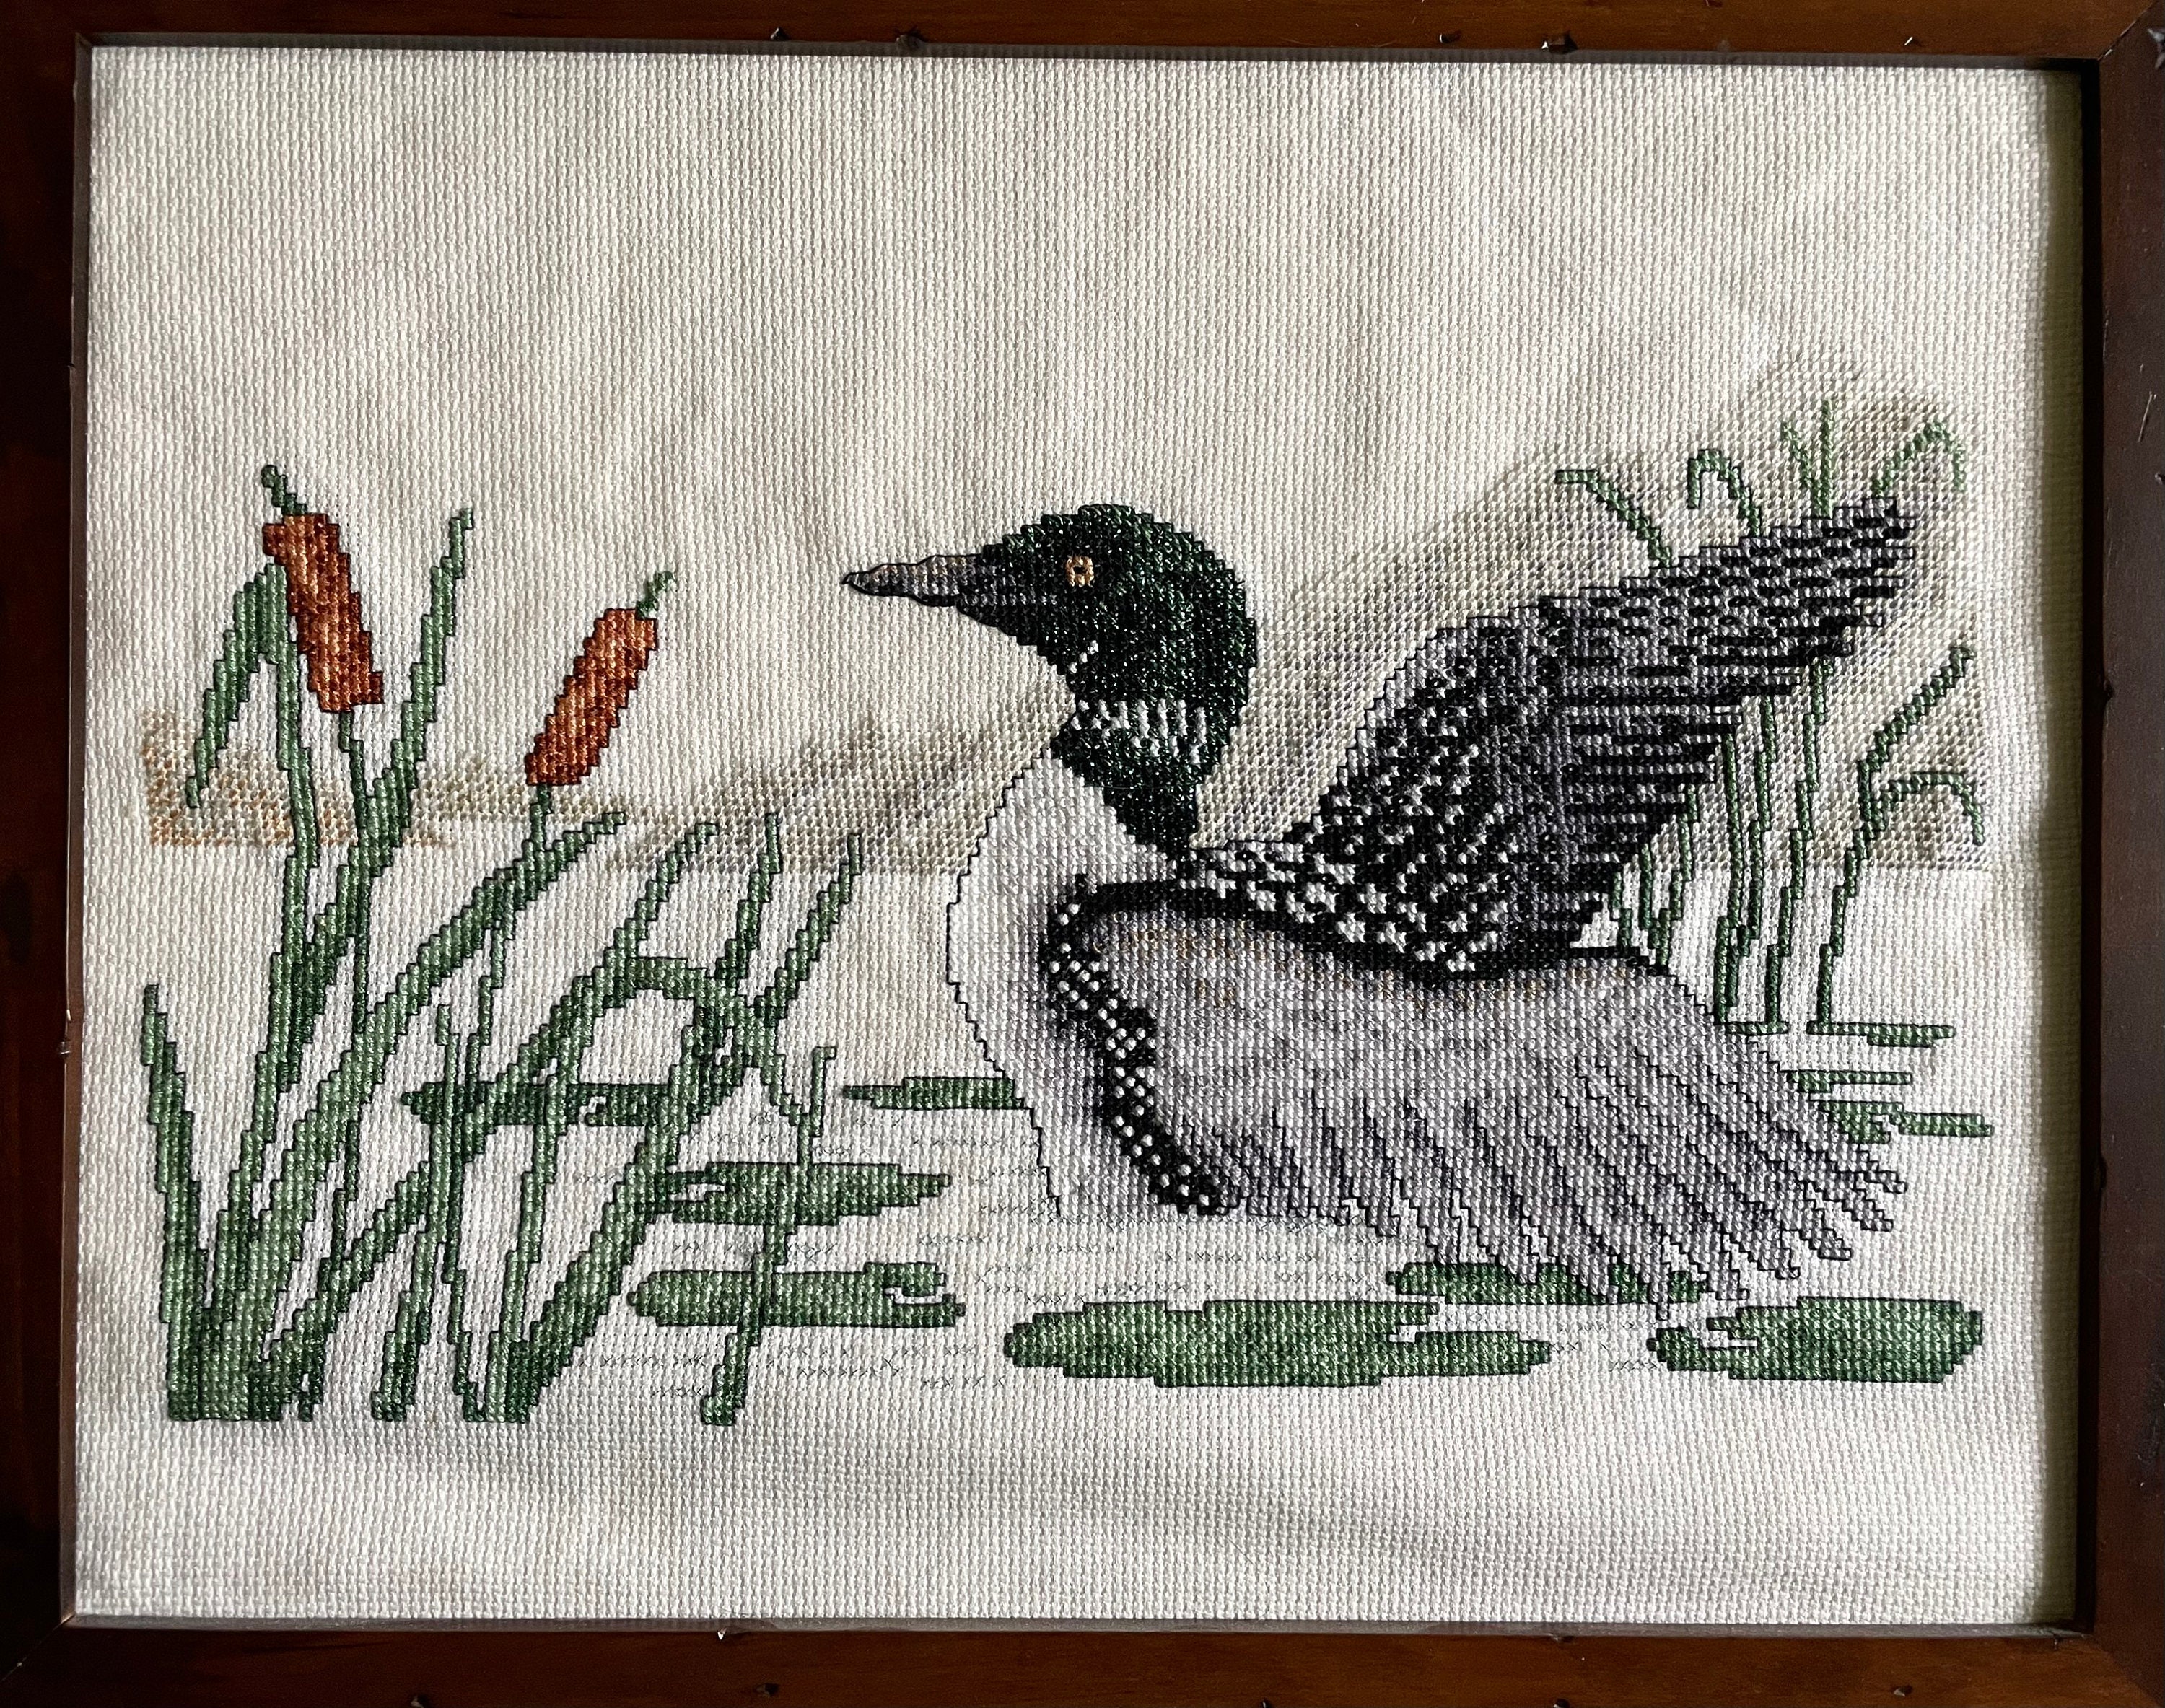 Bird Canvas ~ Elegant Loon on the Lake handpainted 18 mesh Needlepoint  Canvas by Needle Crossings